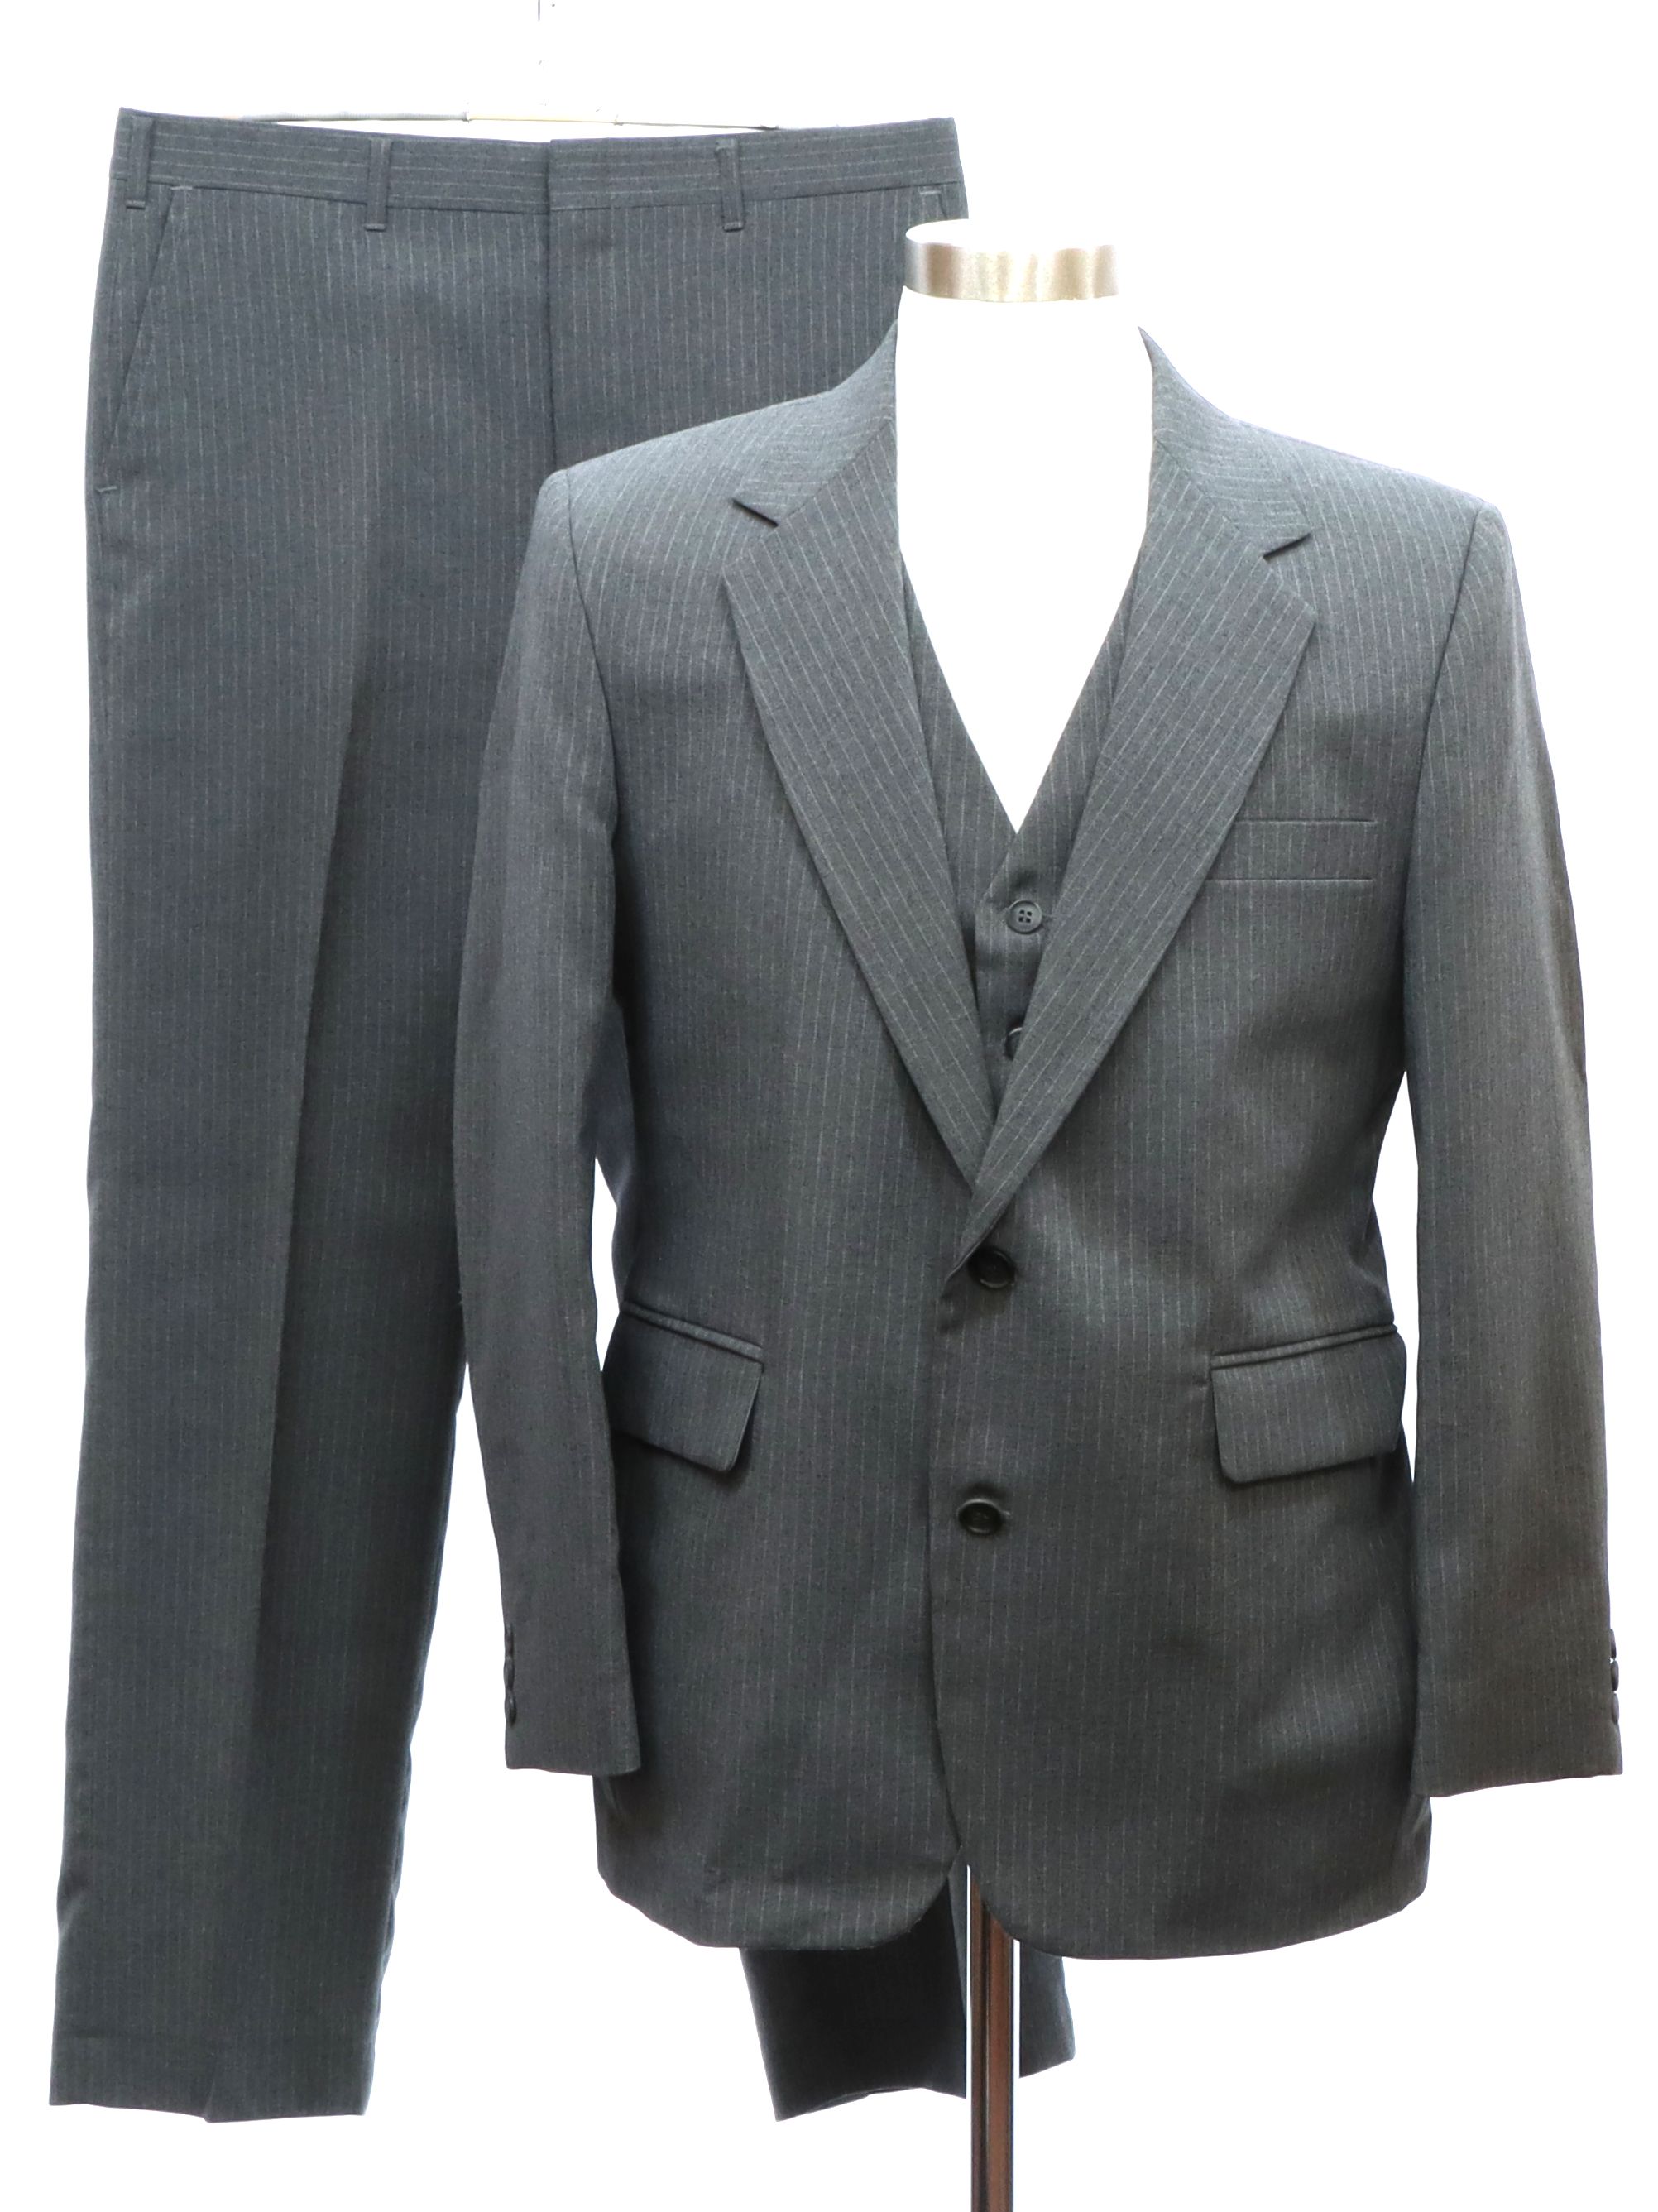 Retro 80's Suit: Early 80s or late 70s -Haggar Magic Stretch- Mens ...